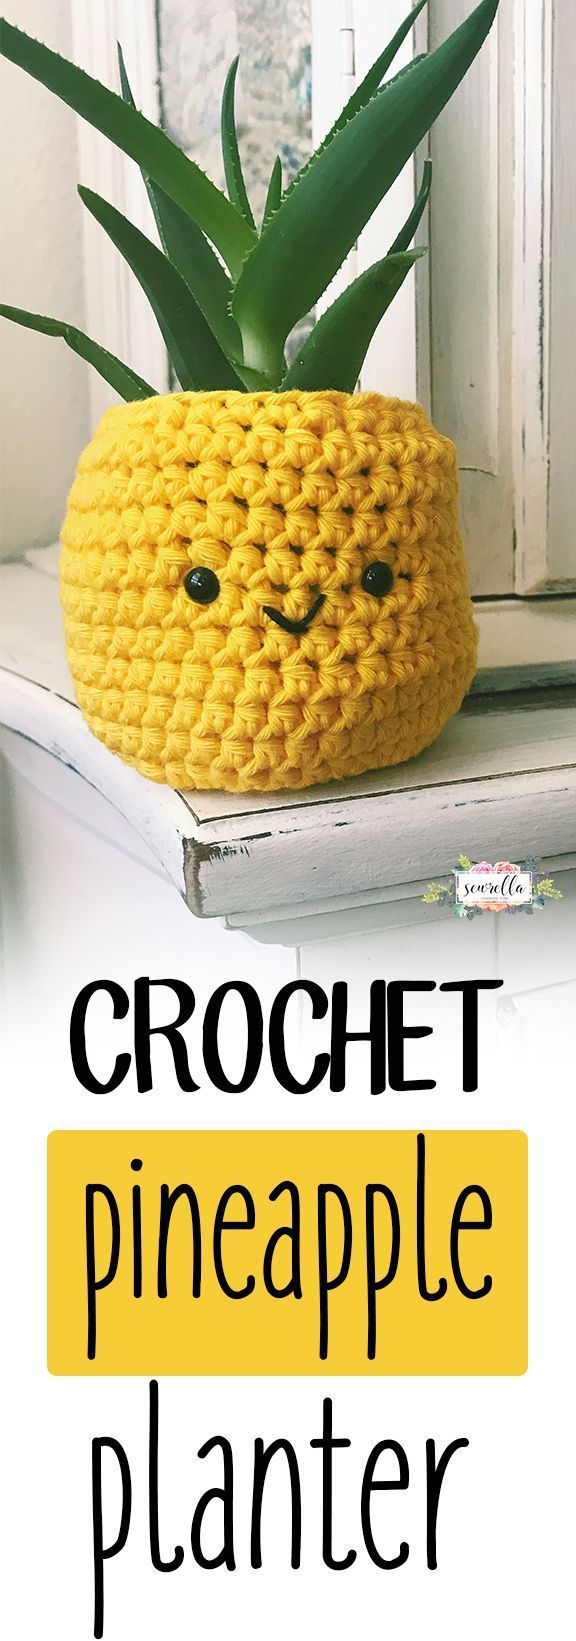 Crochet this easy Pineapple Planter in about half an hour! It’s such a sweet summer project and makes a great gift. stitch,